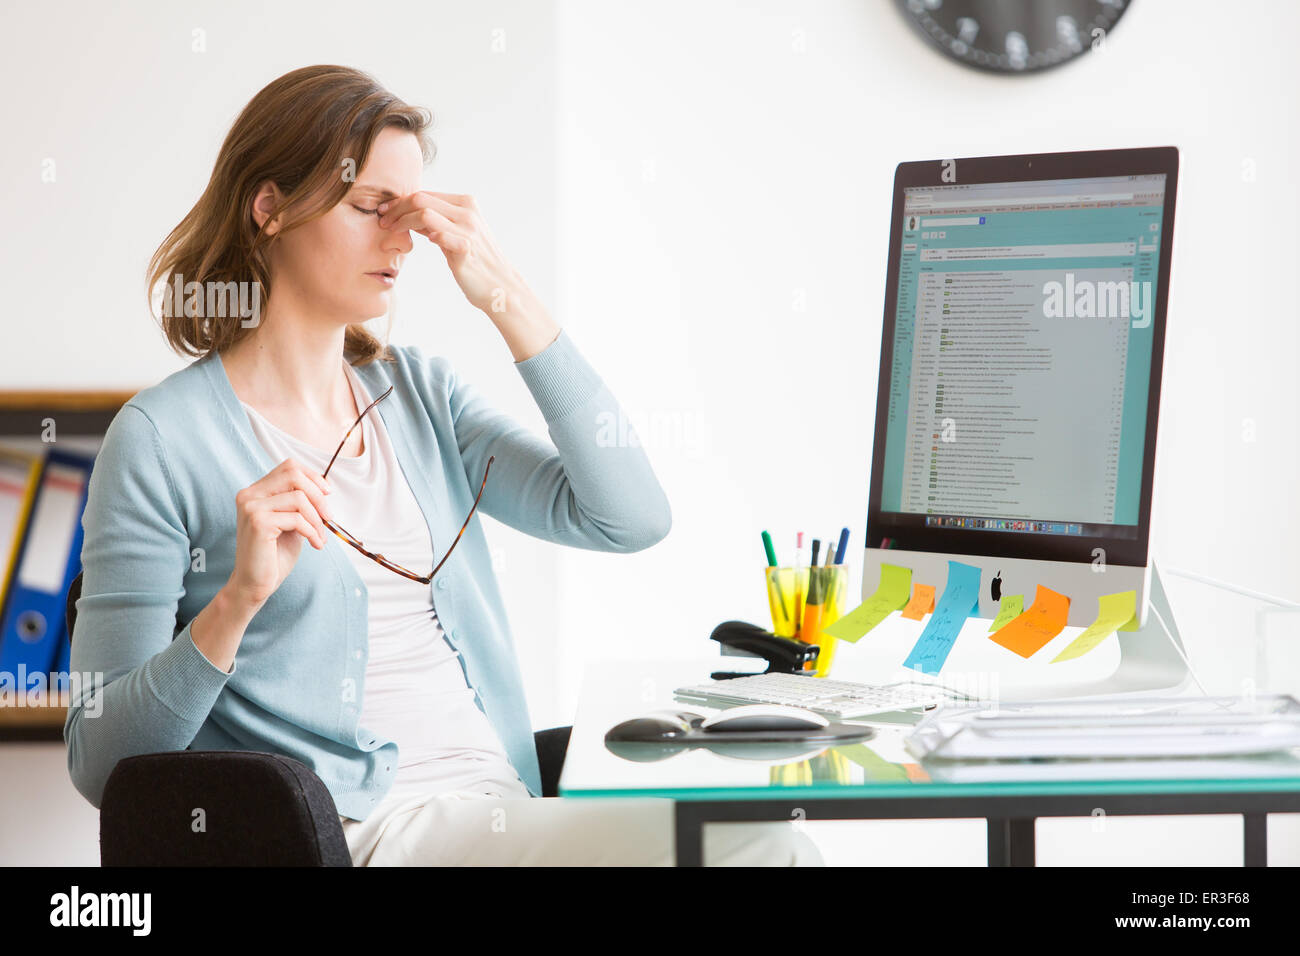 Woman at work suffering from headache. Stock Photo